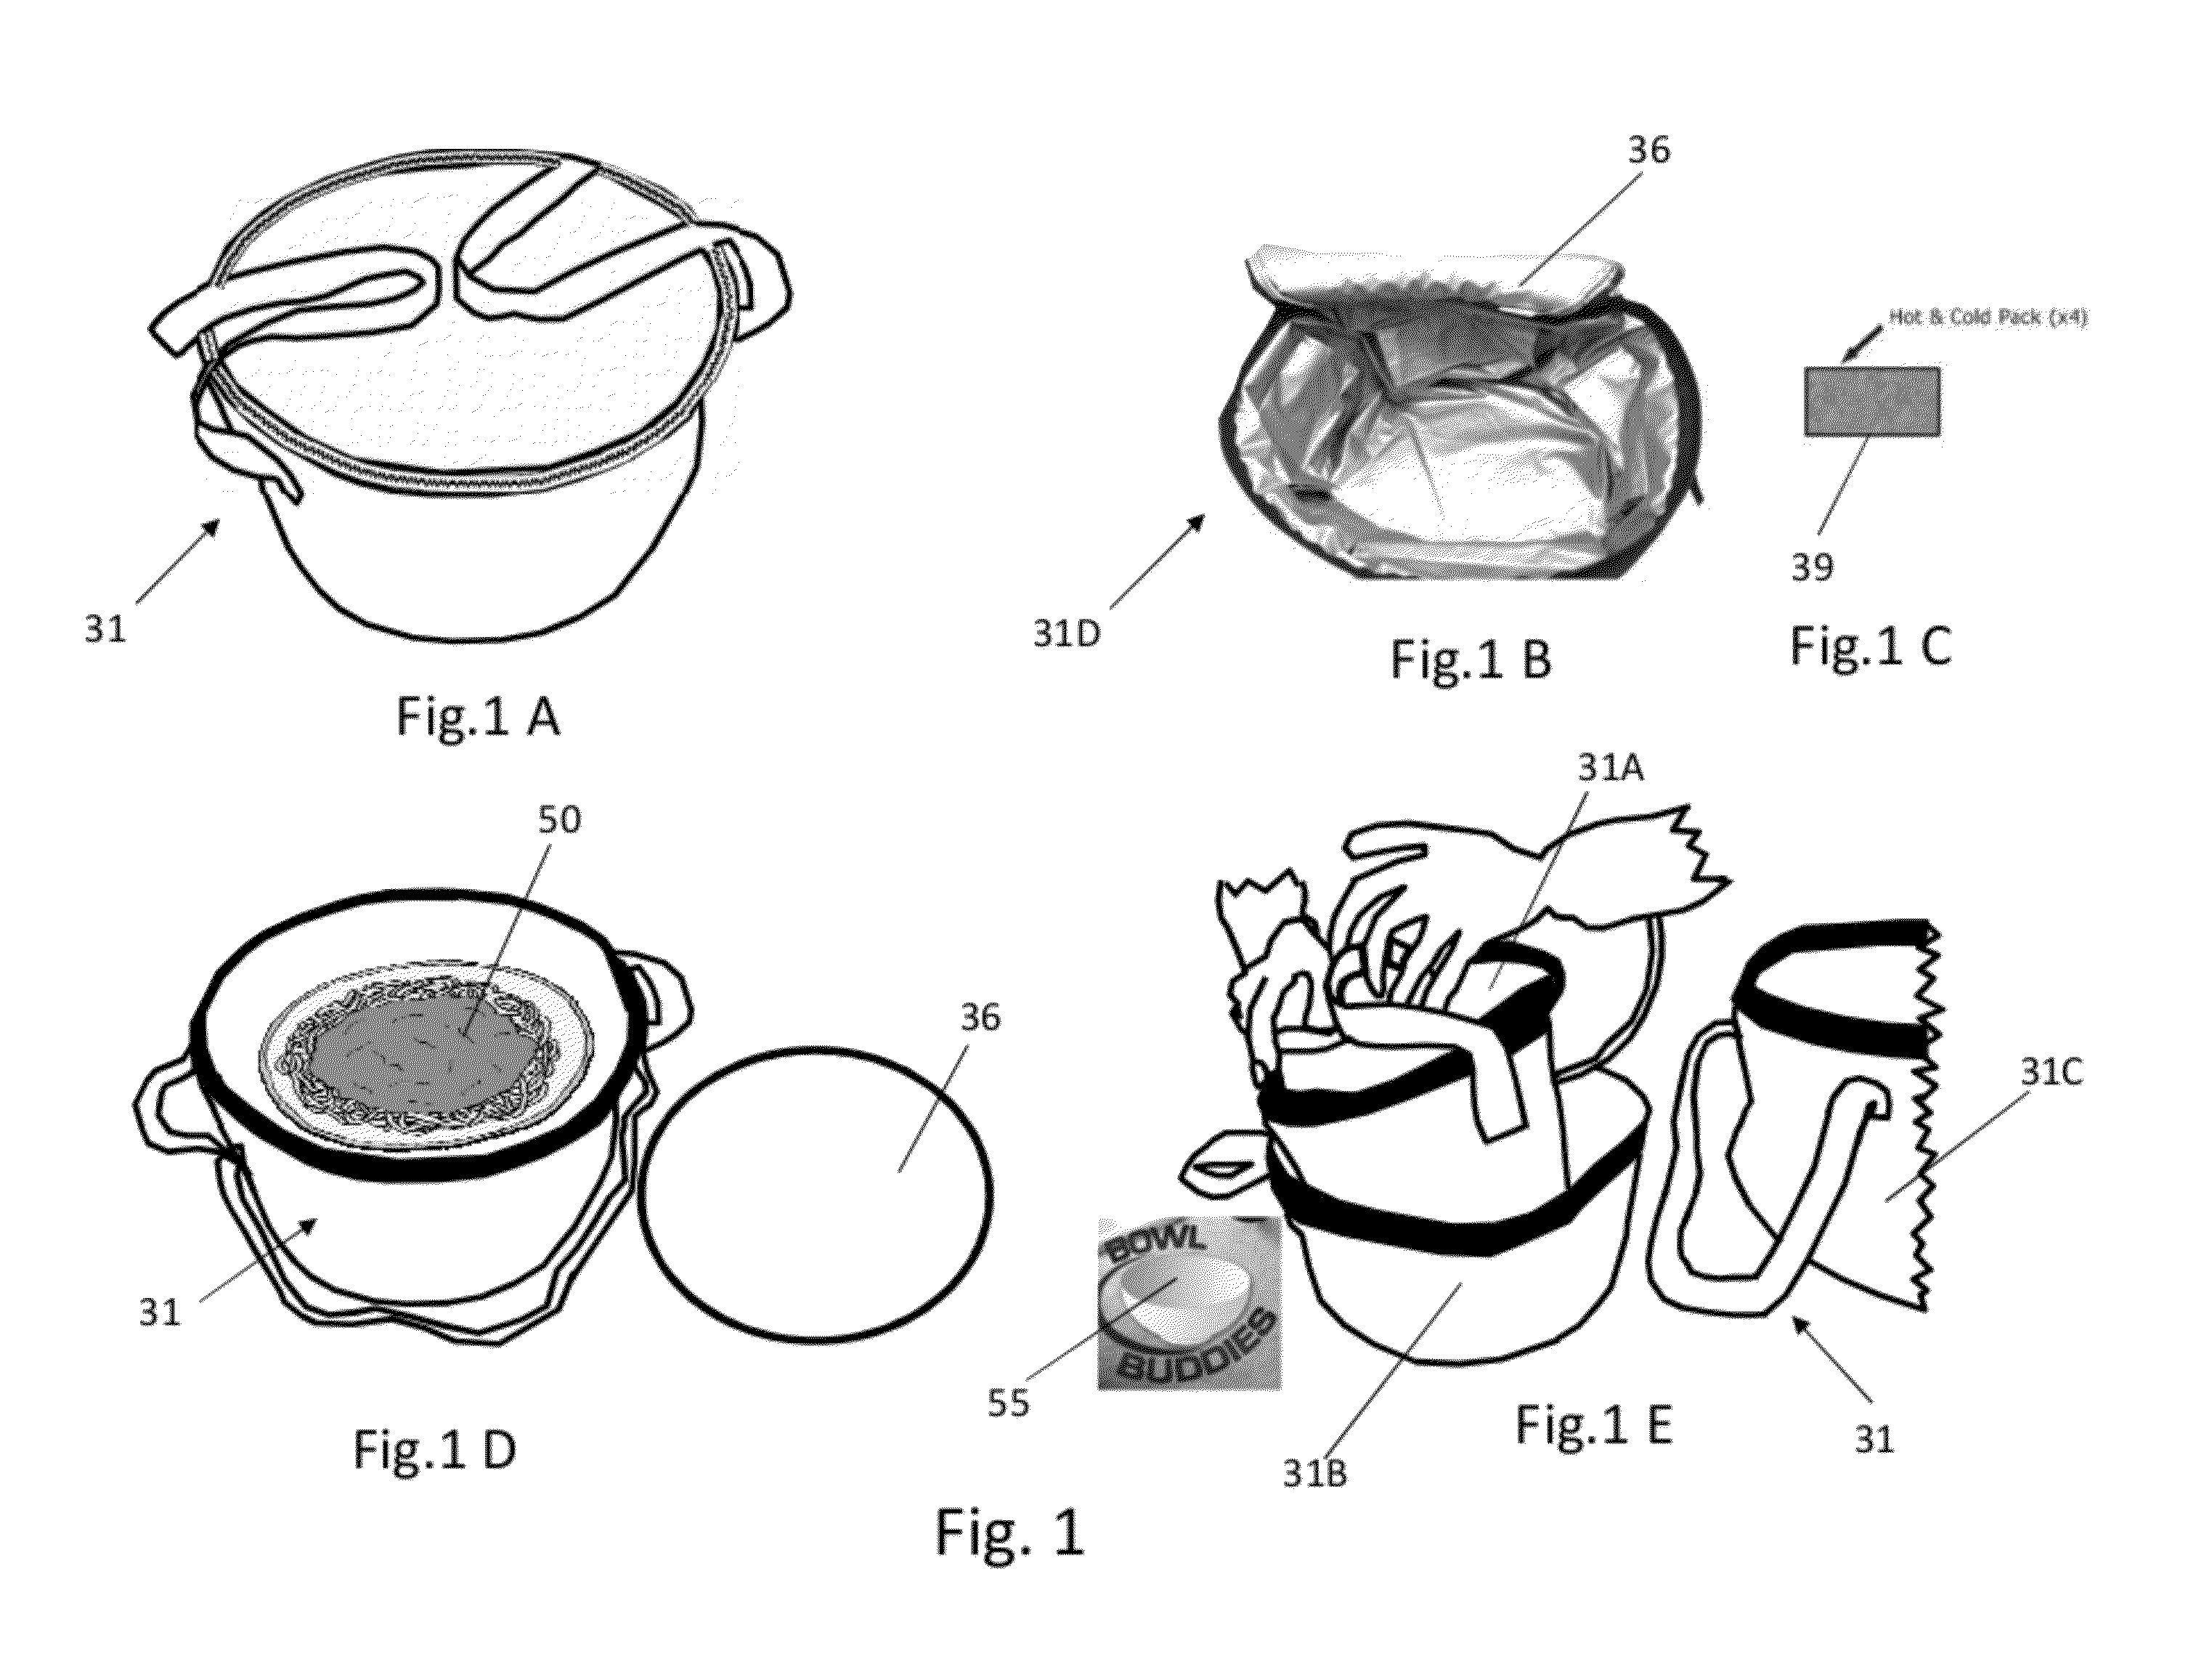 Insulated Food Carrying Device called The Bowl Buddy